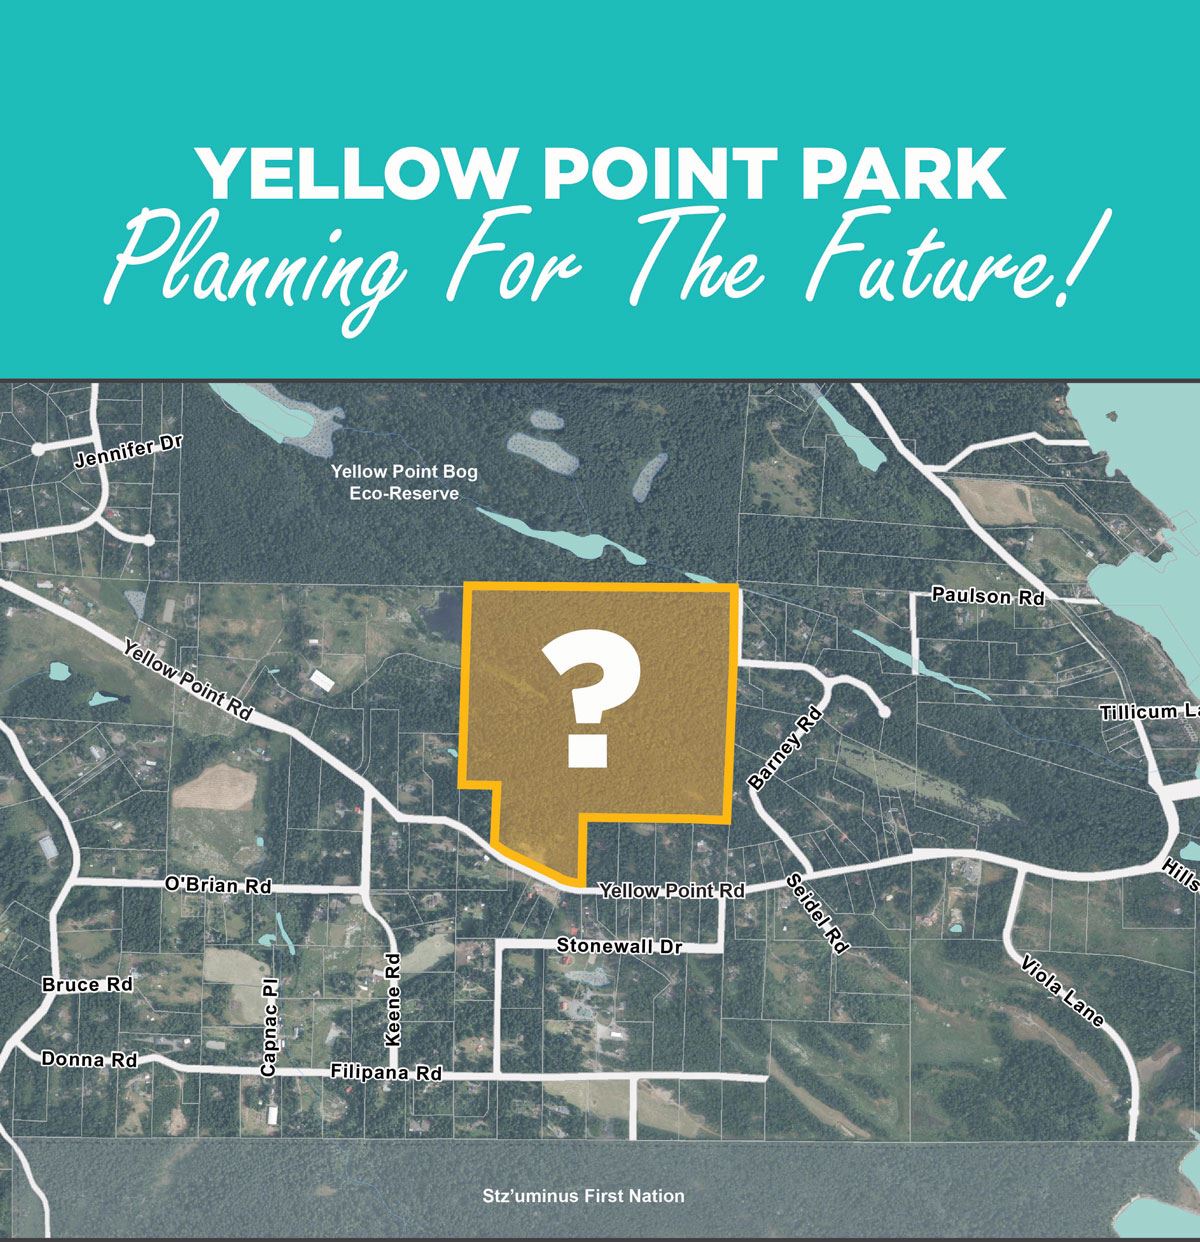 Yellow Point Park Engagement Poster - "Planning for the Future" 